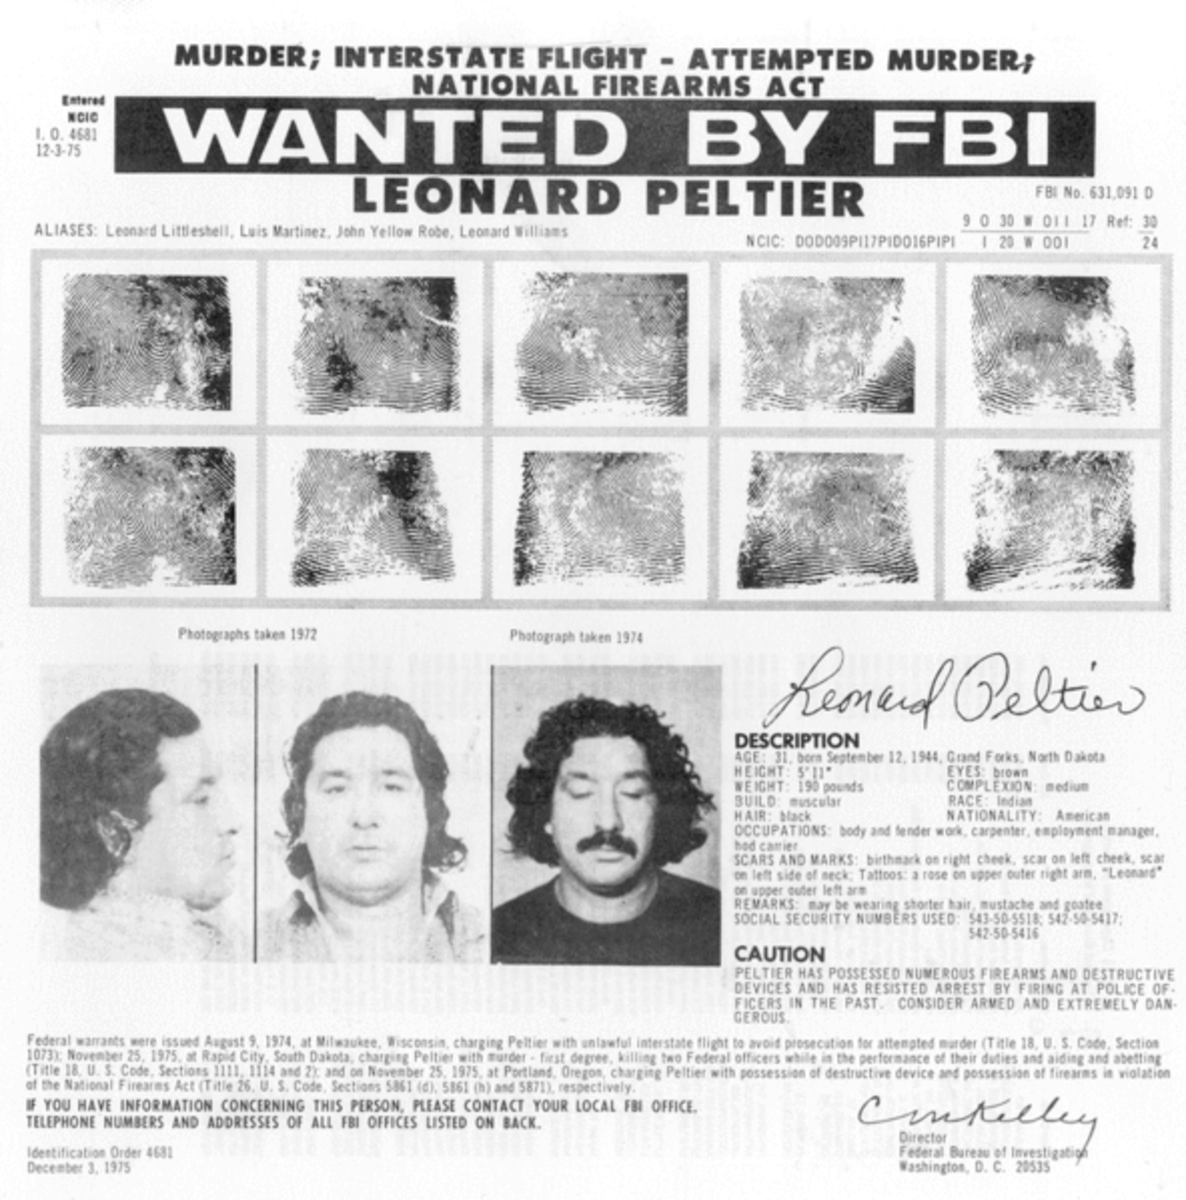 The wanted poster for Leonard Peltier.